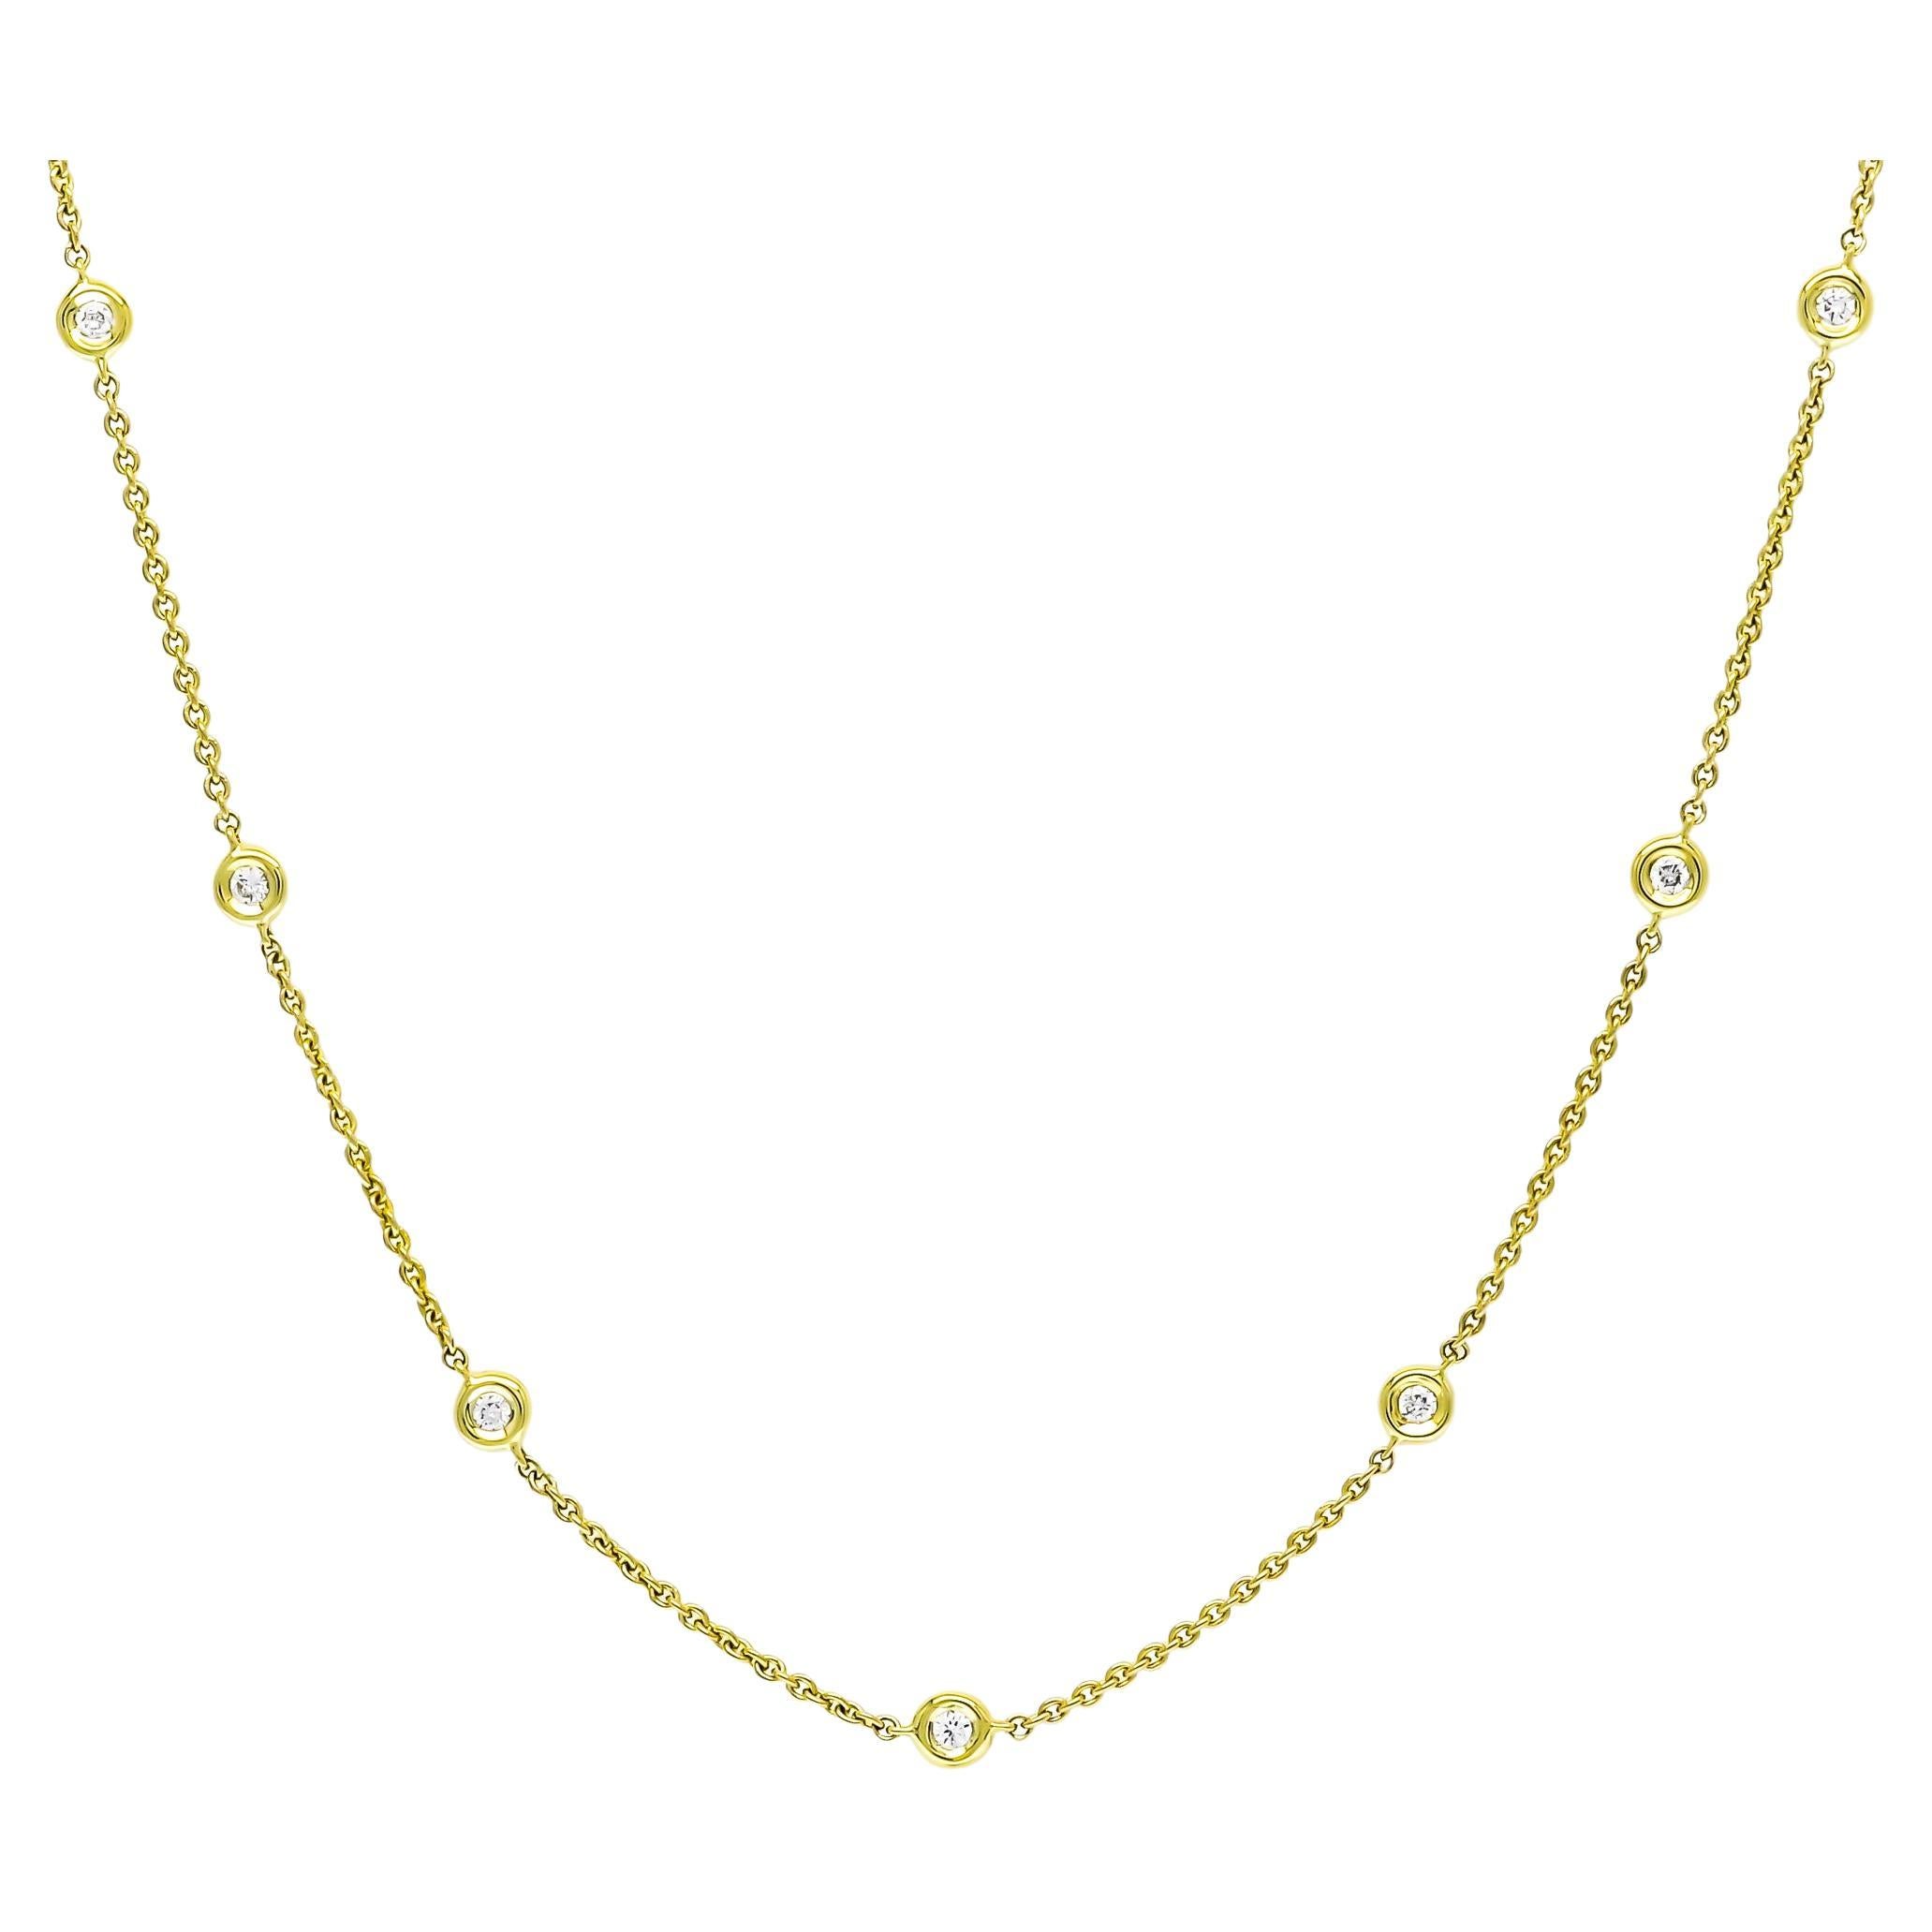 Natural Diamond Chain Necklace 0.35cts 18 Karat Yellow Gold Chain Necklace